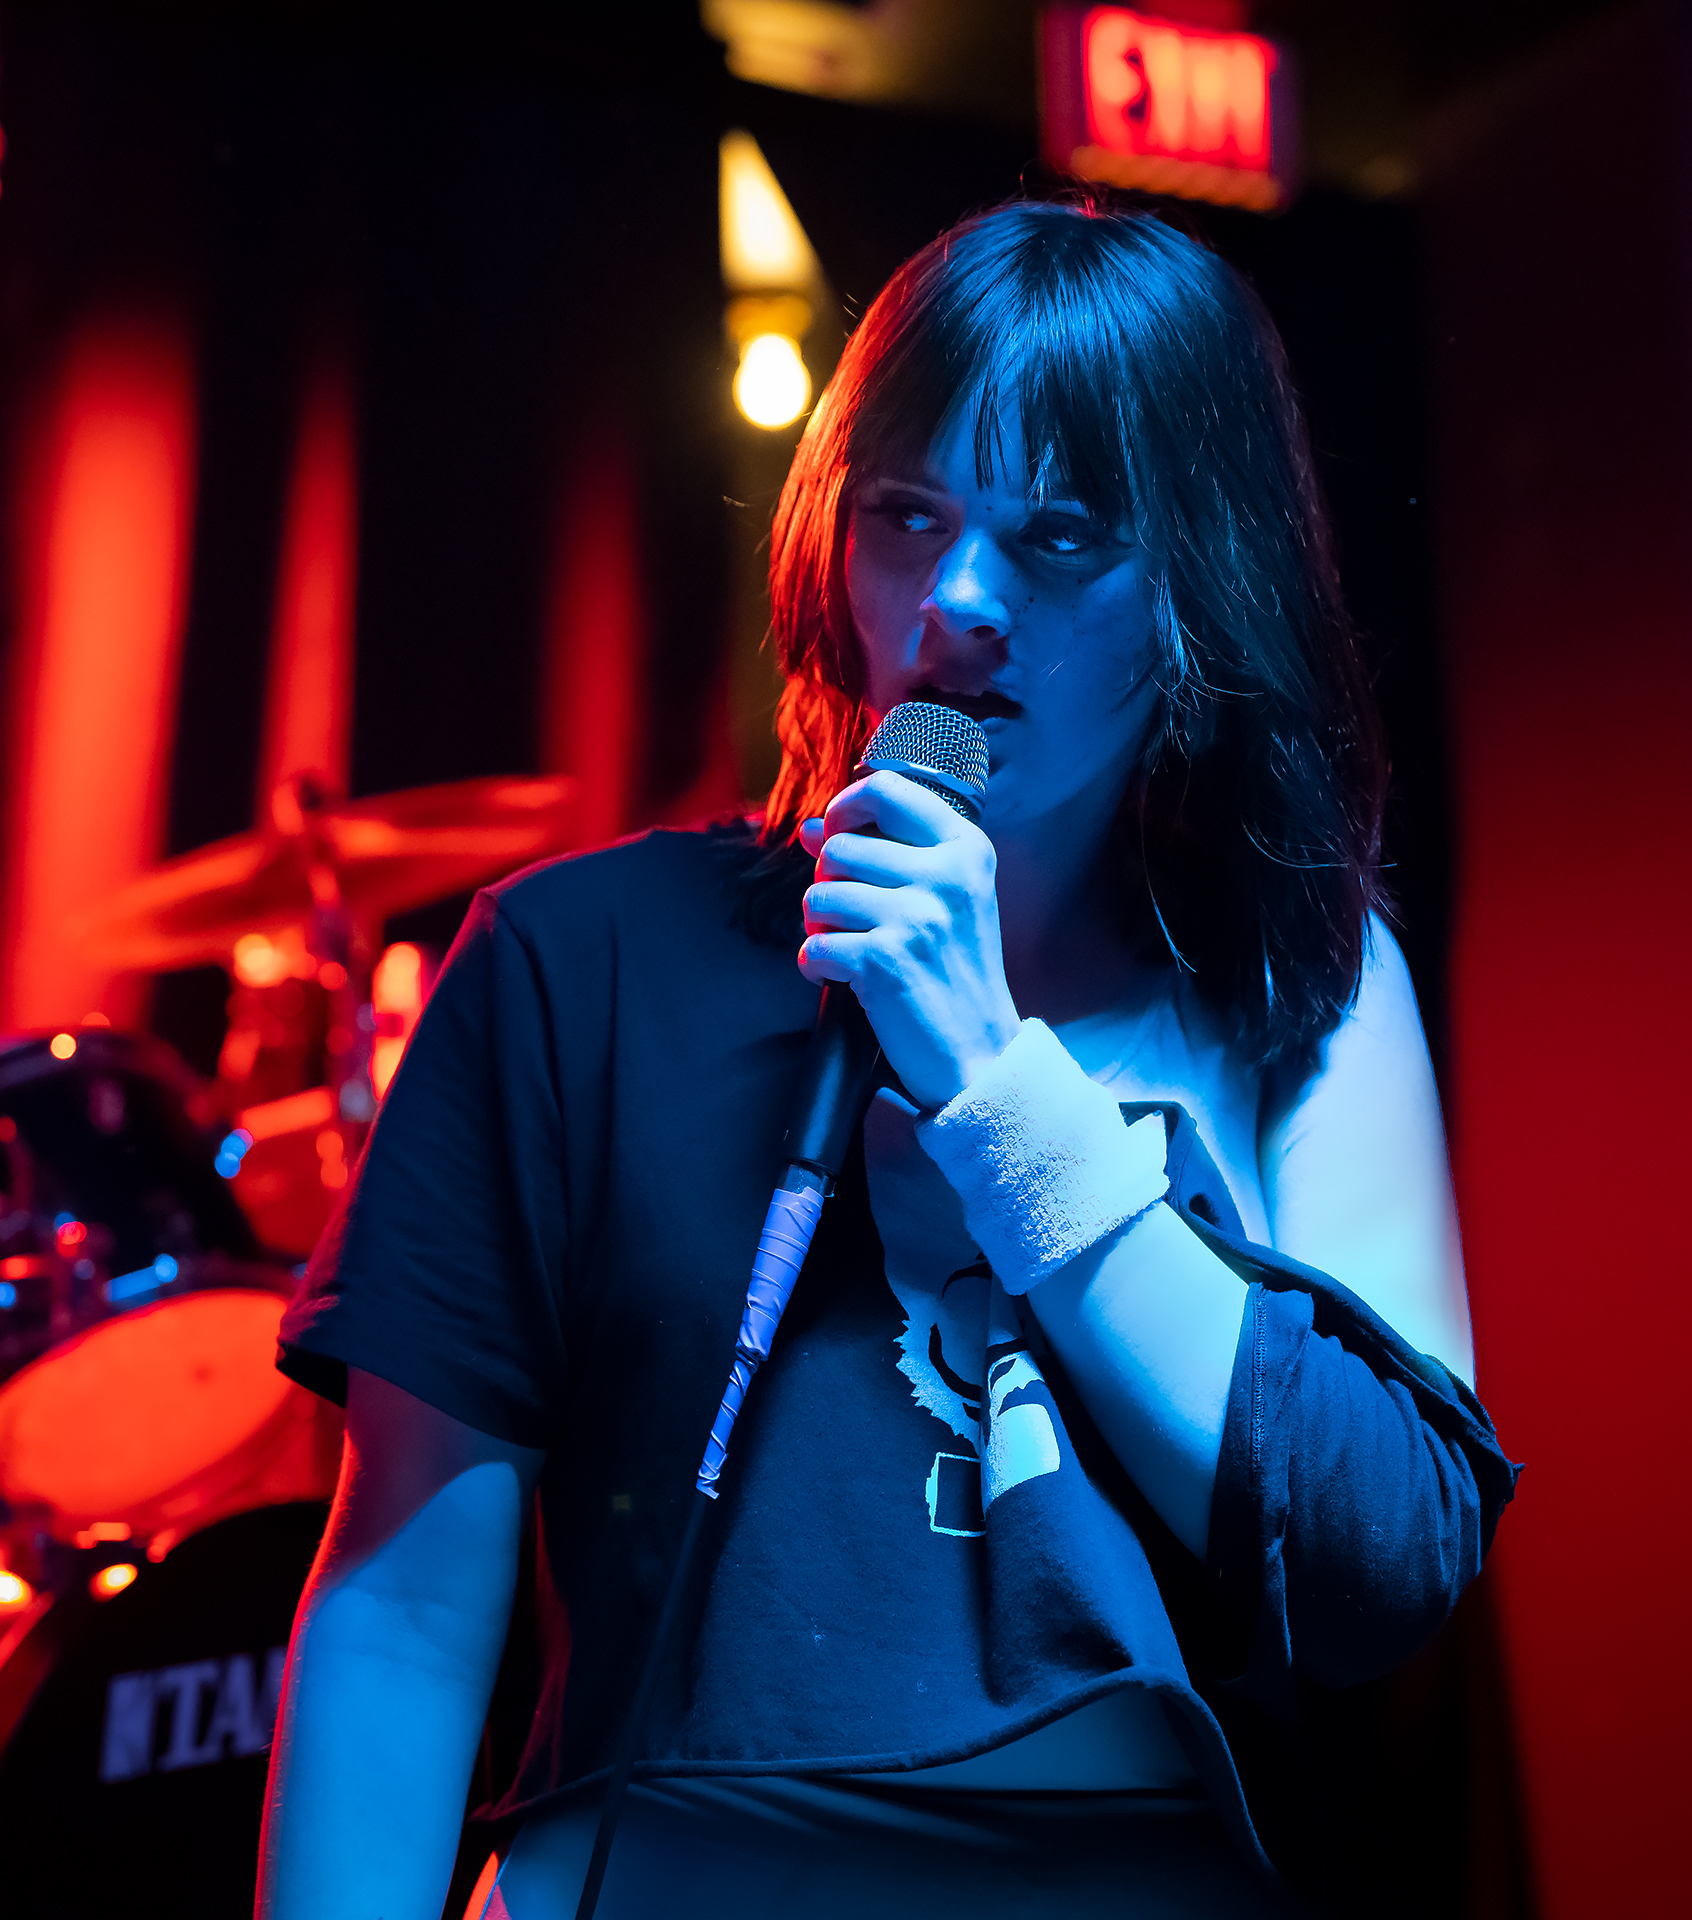 Redd, lead vocalist for band "Electrokat", is posed singing mid-performance wearing 80s style workout gear. She looks off in thought in front of a drumset, featured in contrasting red and blue lights.